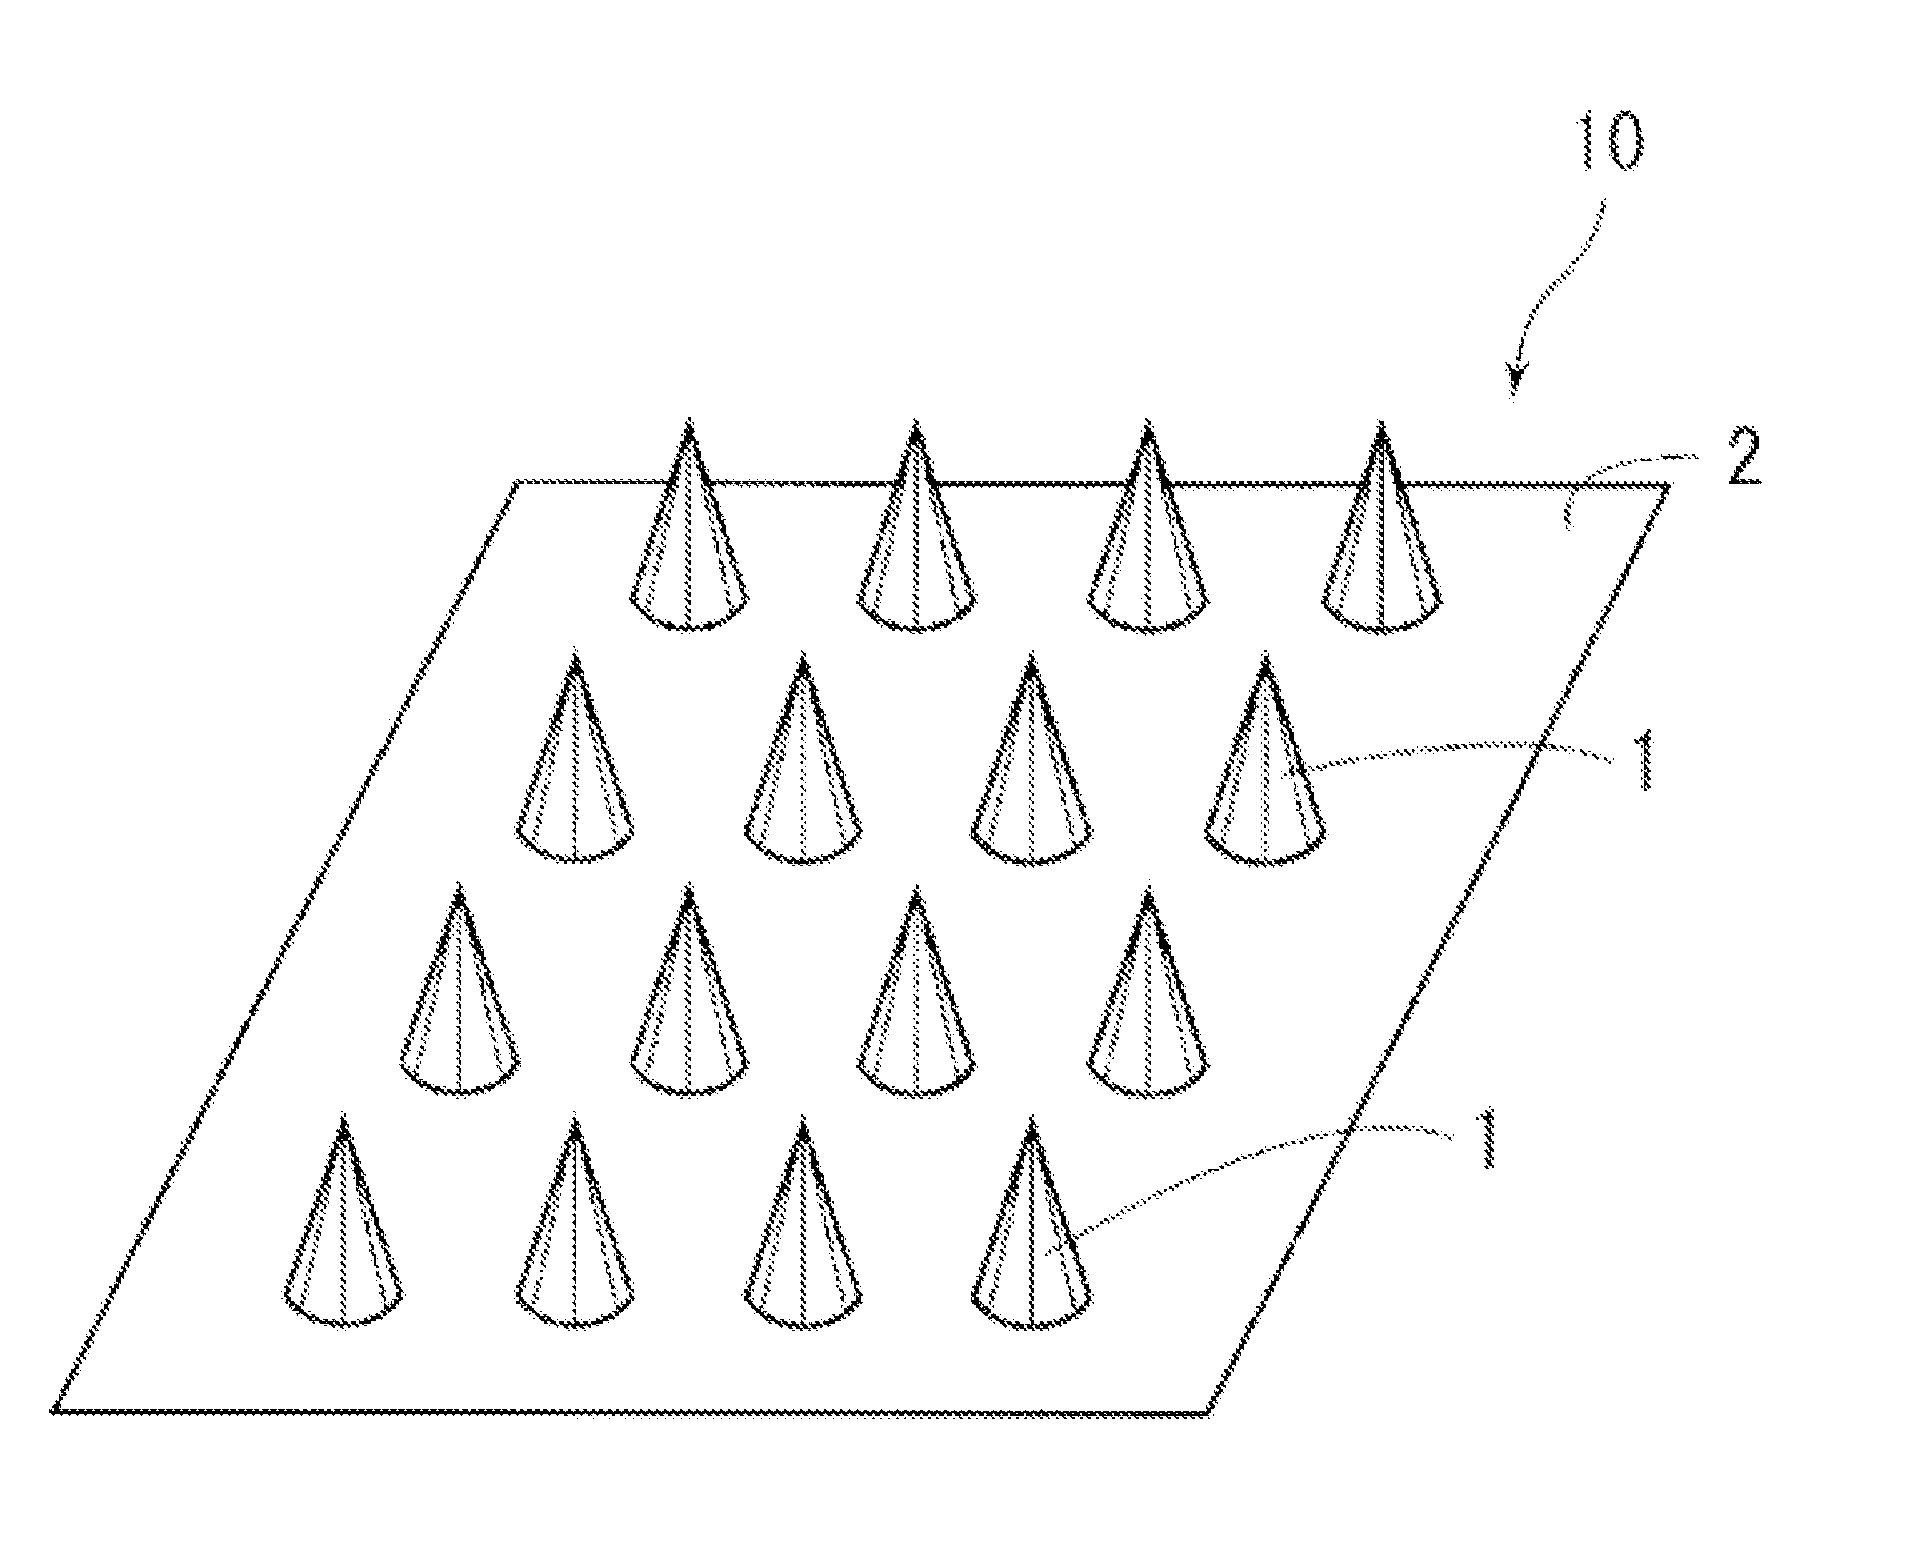 Dissolvable Microneedles Comprising One Or More Encapsulated Cosmetic Ingredients